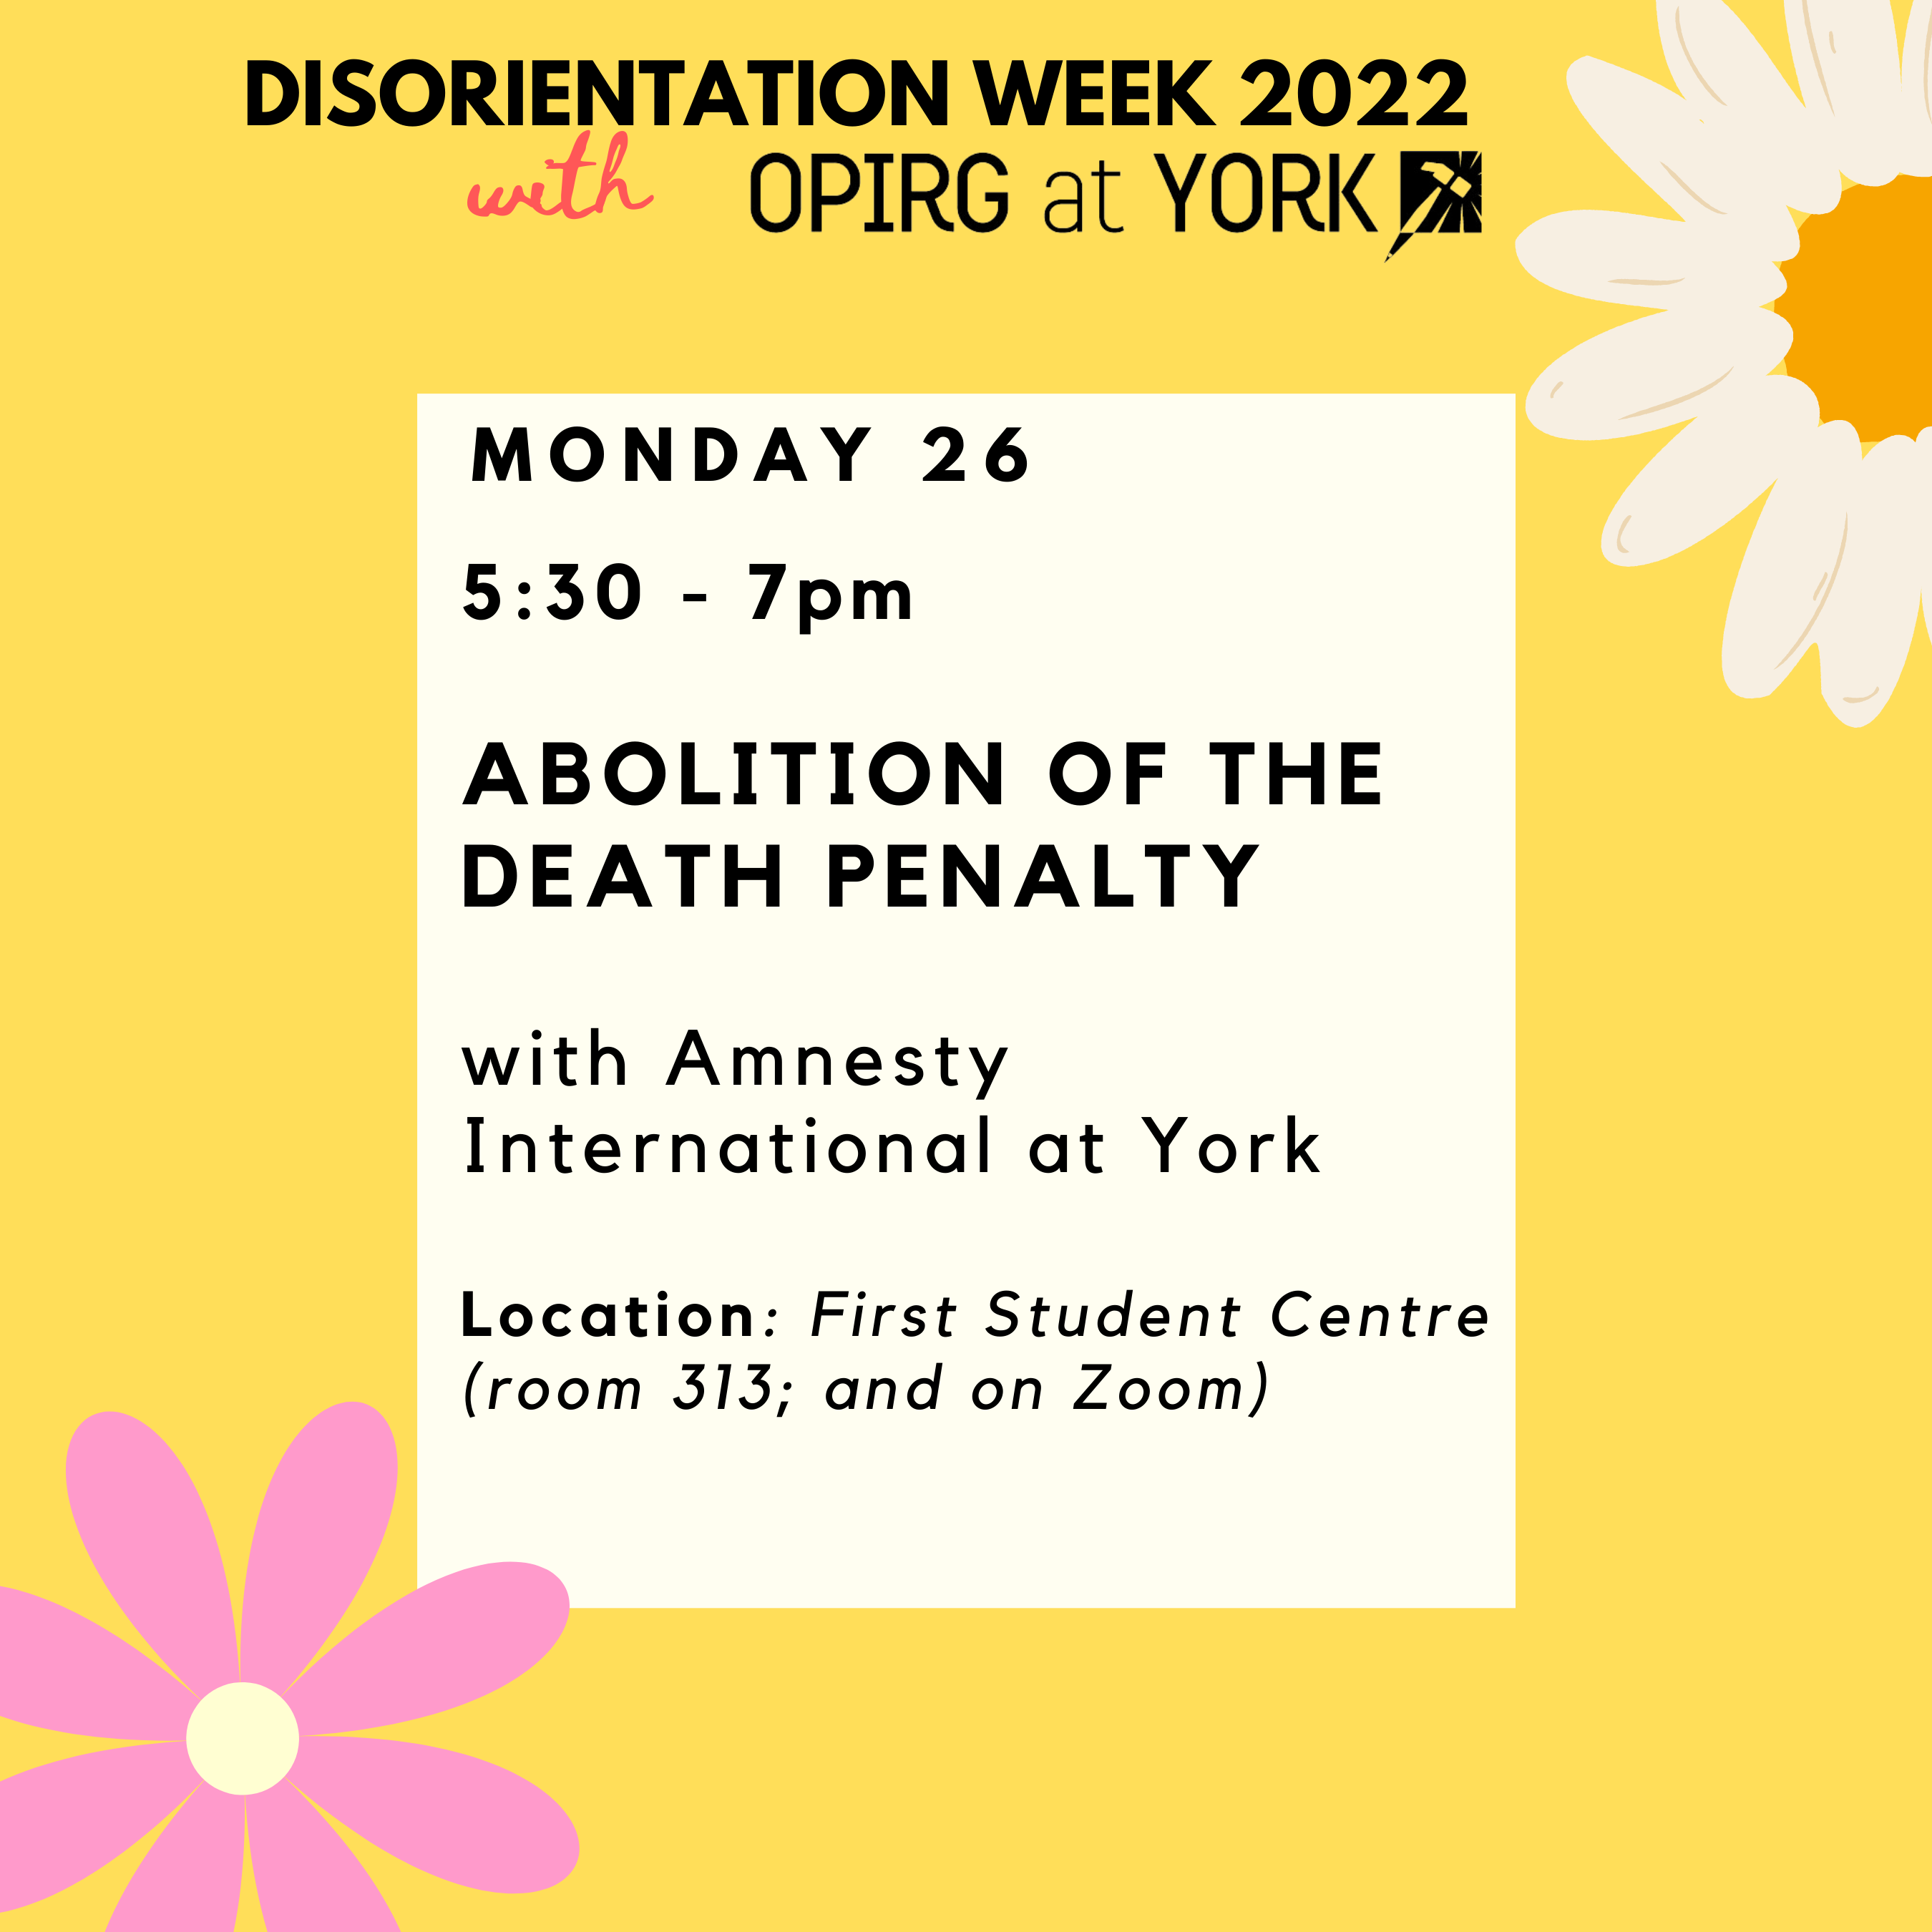 Monday 26, 5:30 - 7pm  Abolition of the  Death penalty   with Amnesty International at York   Location: First Student Centre (room 313; and on Zoom)  Black text on white block with yellow border. Pink flowers in the corners.